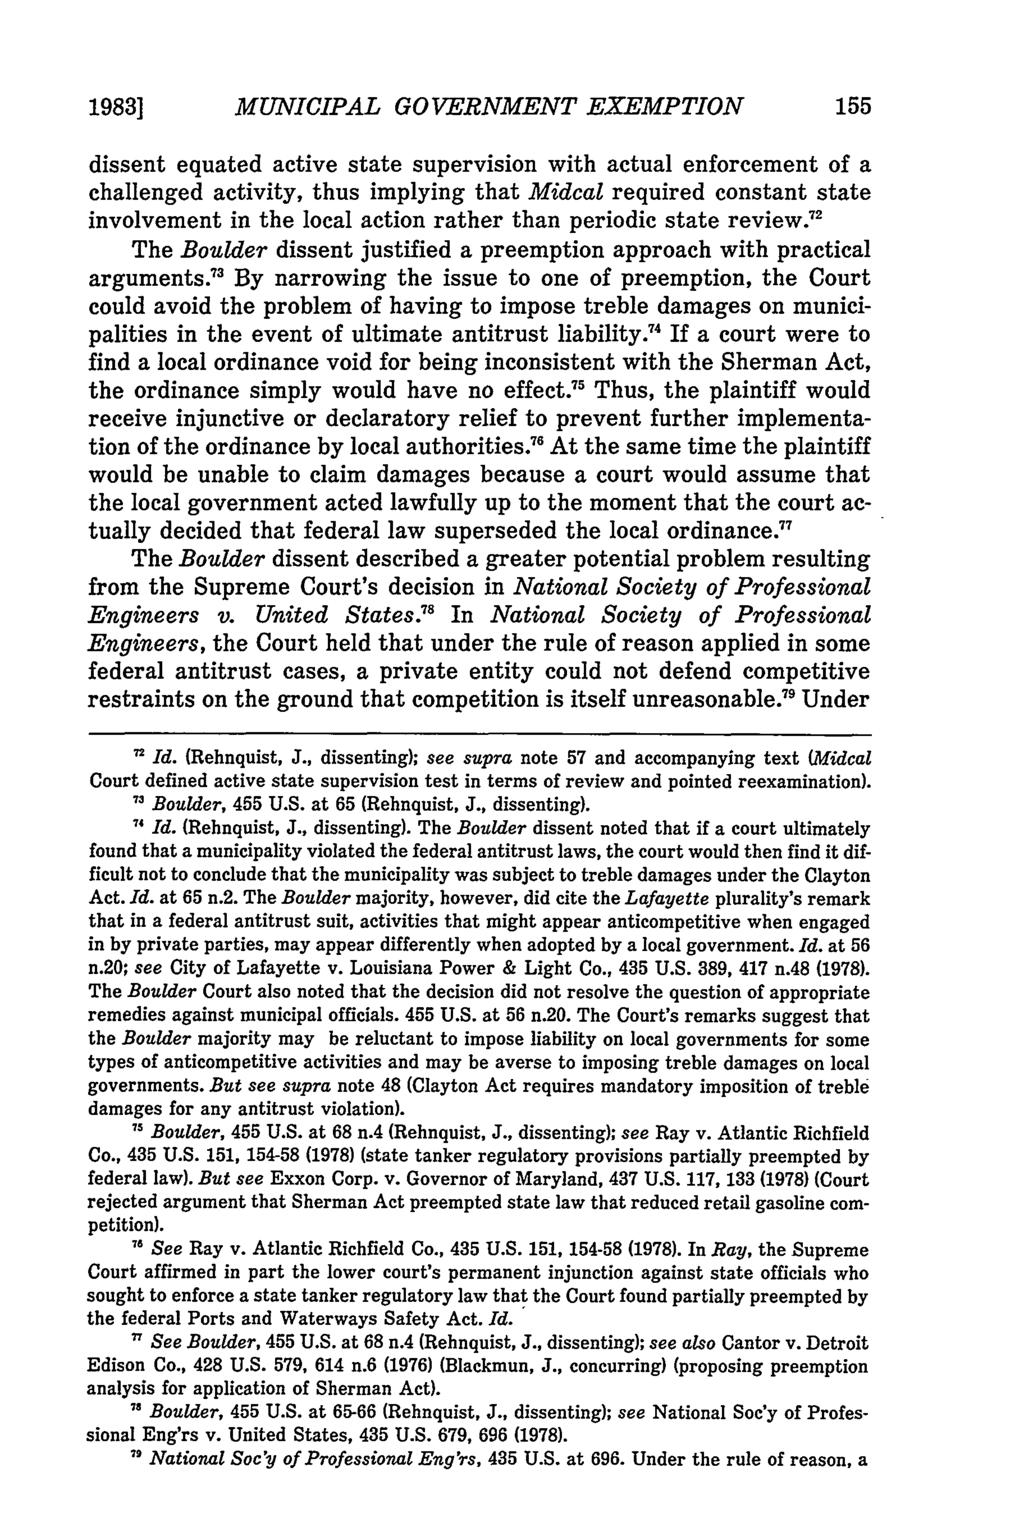 1983] MUNICIPAL GOVERNMENT EXEMPTION dissent equated active state supervision with actual enforcement of a challenged activity, thus implying that Midcal required constant state involvement in the